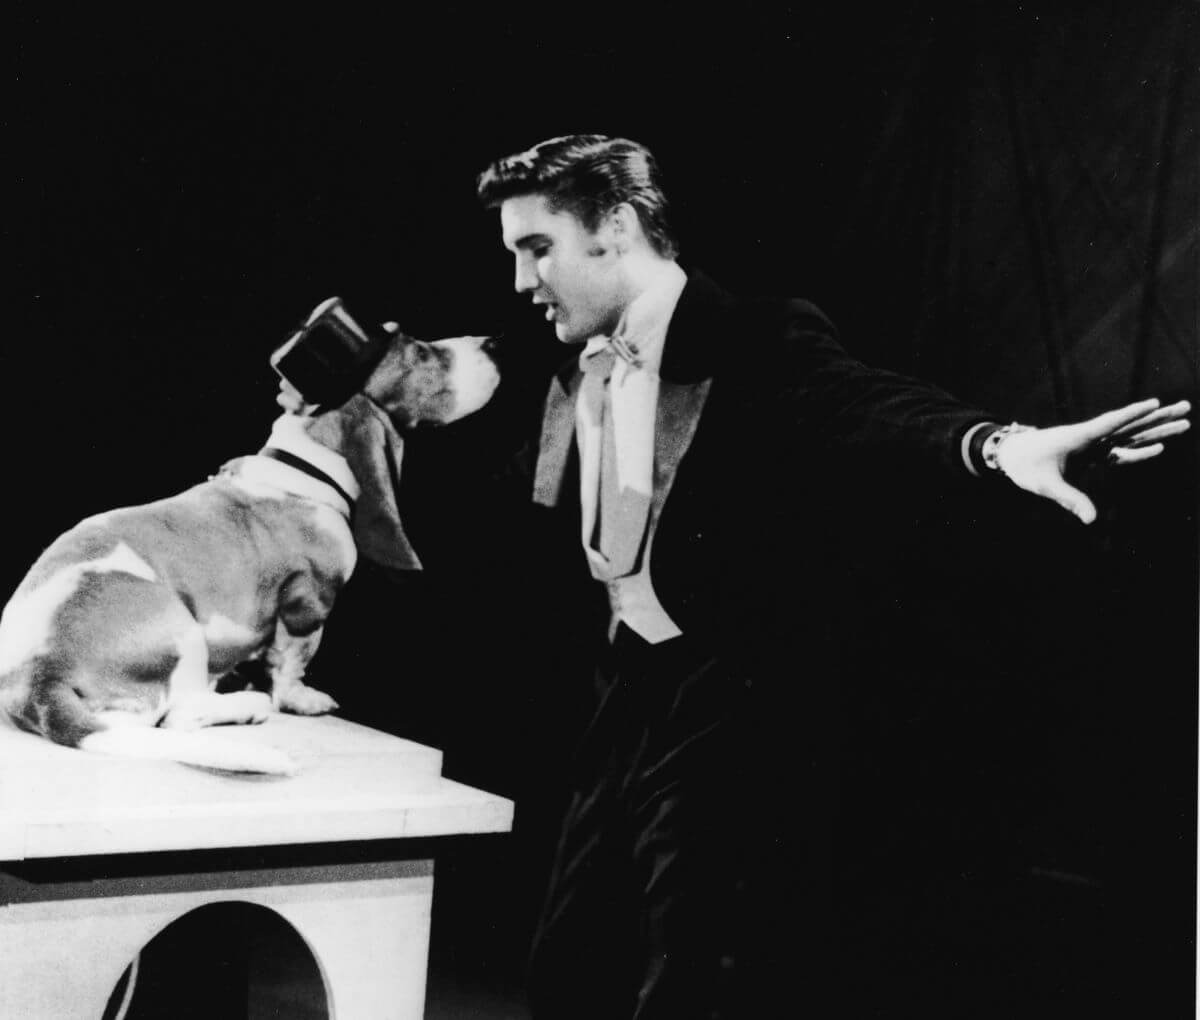 A black and white picture of Elvis singing to a basset hound wearing a top hat.